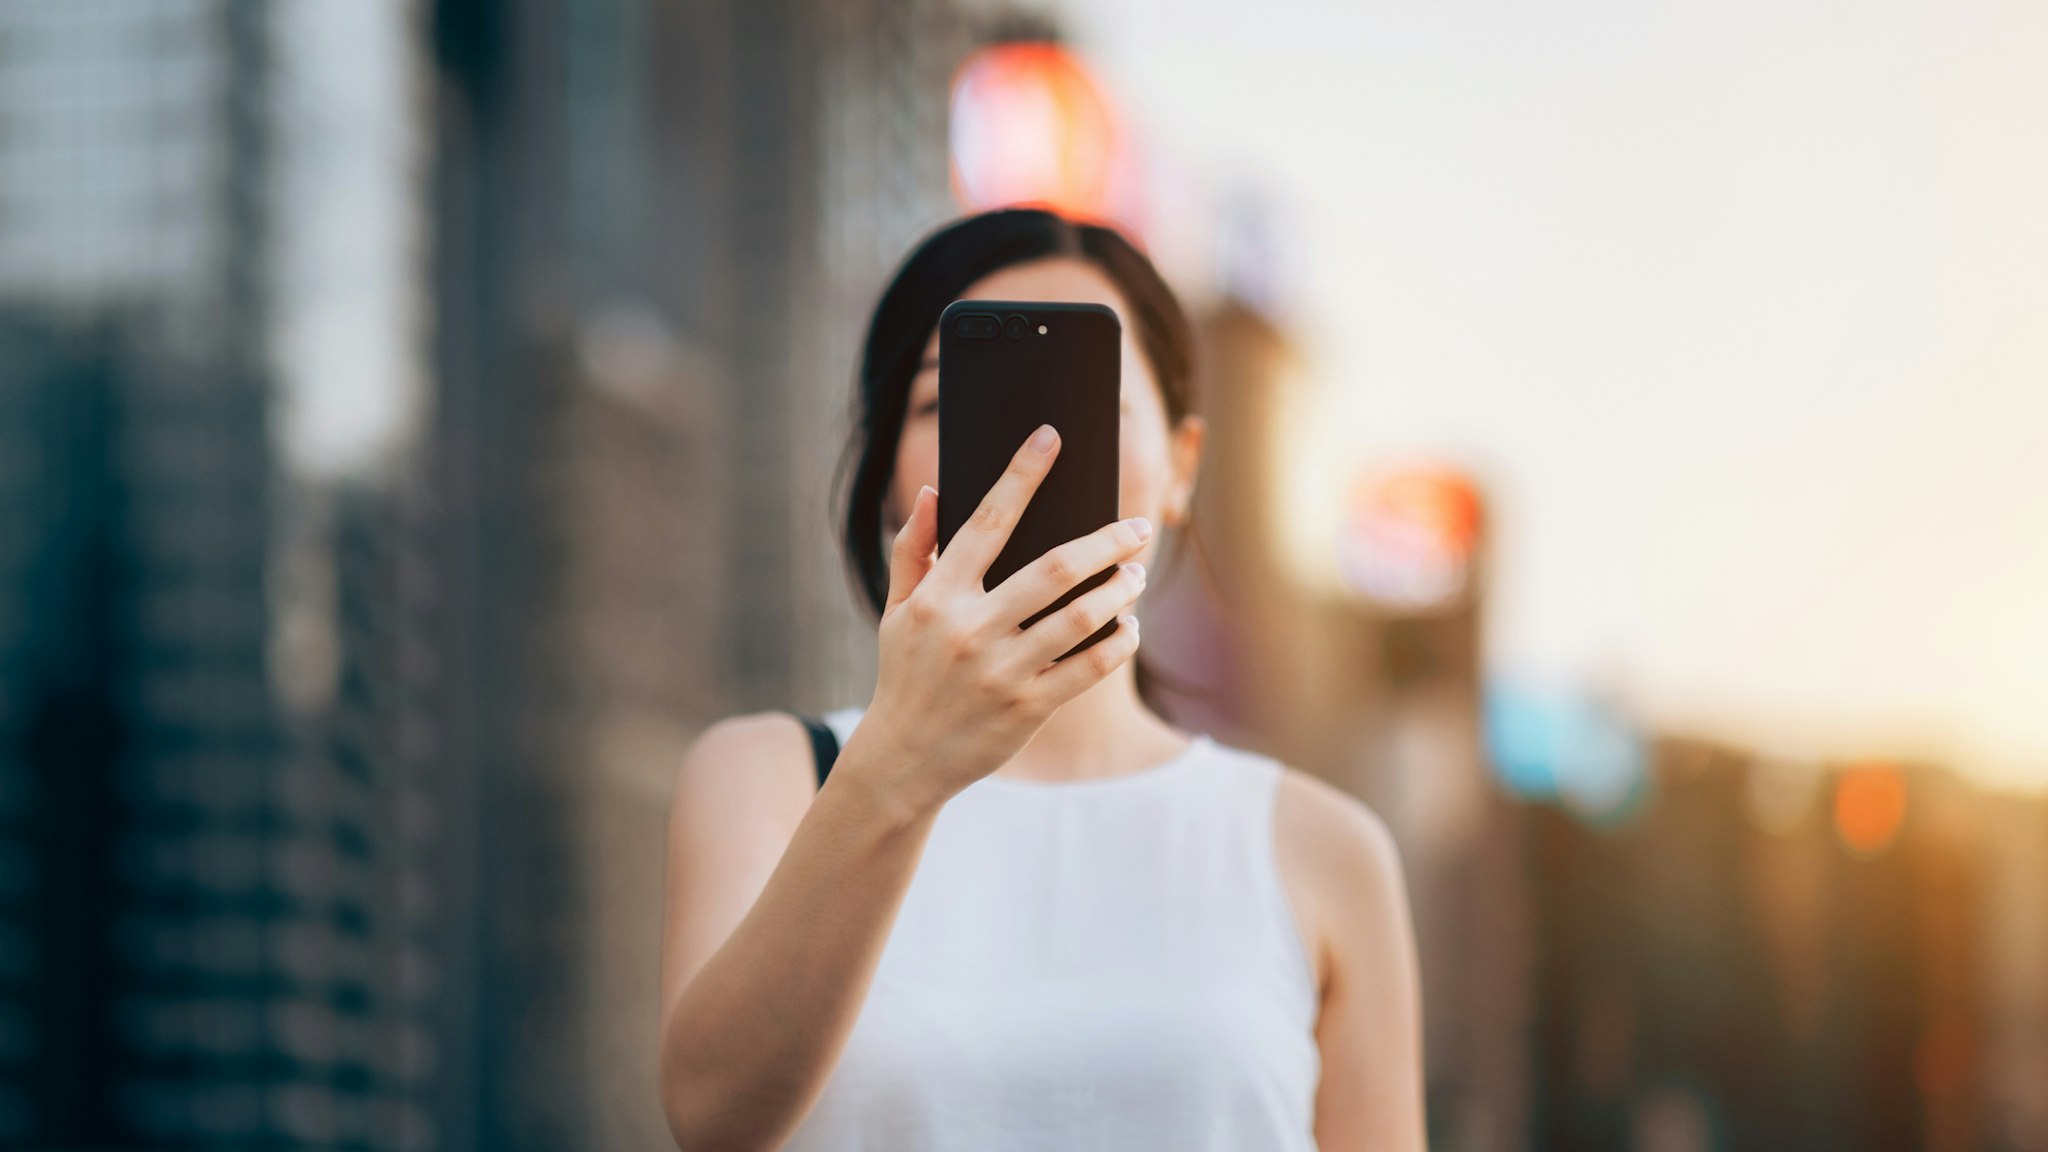 Young woman using smartphone outdoors in front of blurry city scene